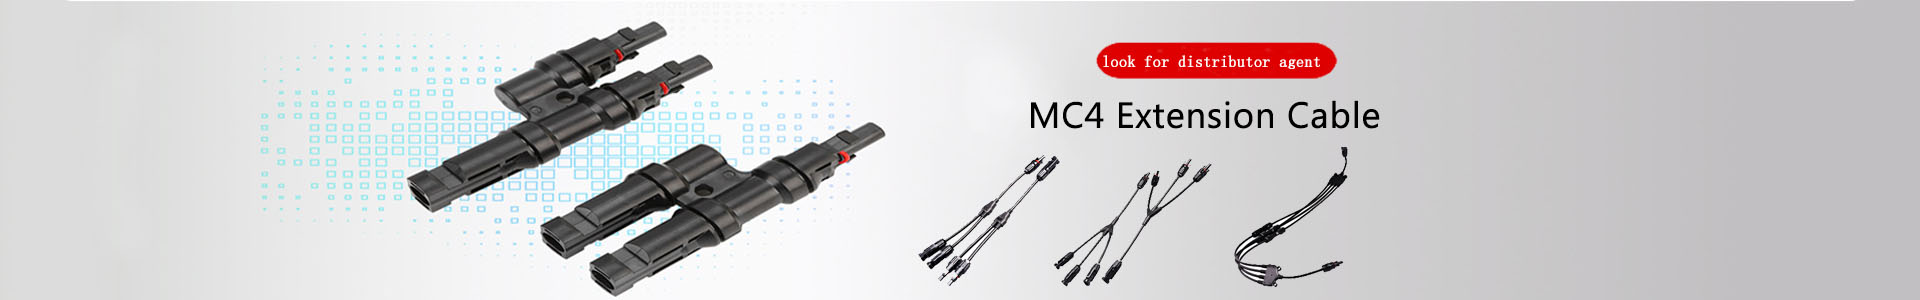 UL4703 solar cable | Handwe Group-Solar | solar connector,solar branch connector,diode fuse connector,MC4 extnsion cable,H1Z2Z2 solar cable, UL4703 solar cable | Leading manufacturer and supplier of solar pv cables and connectors